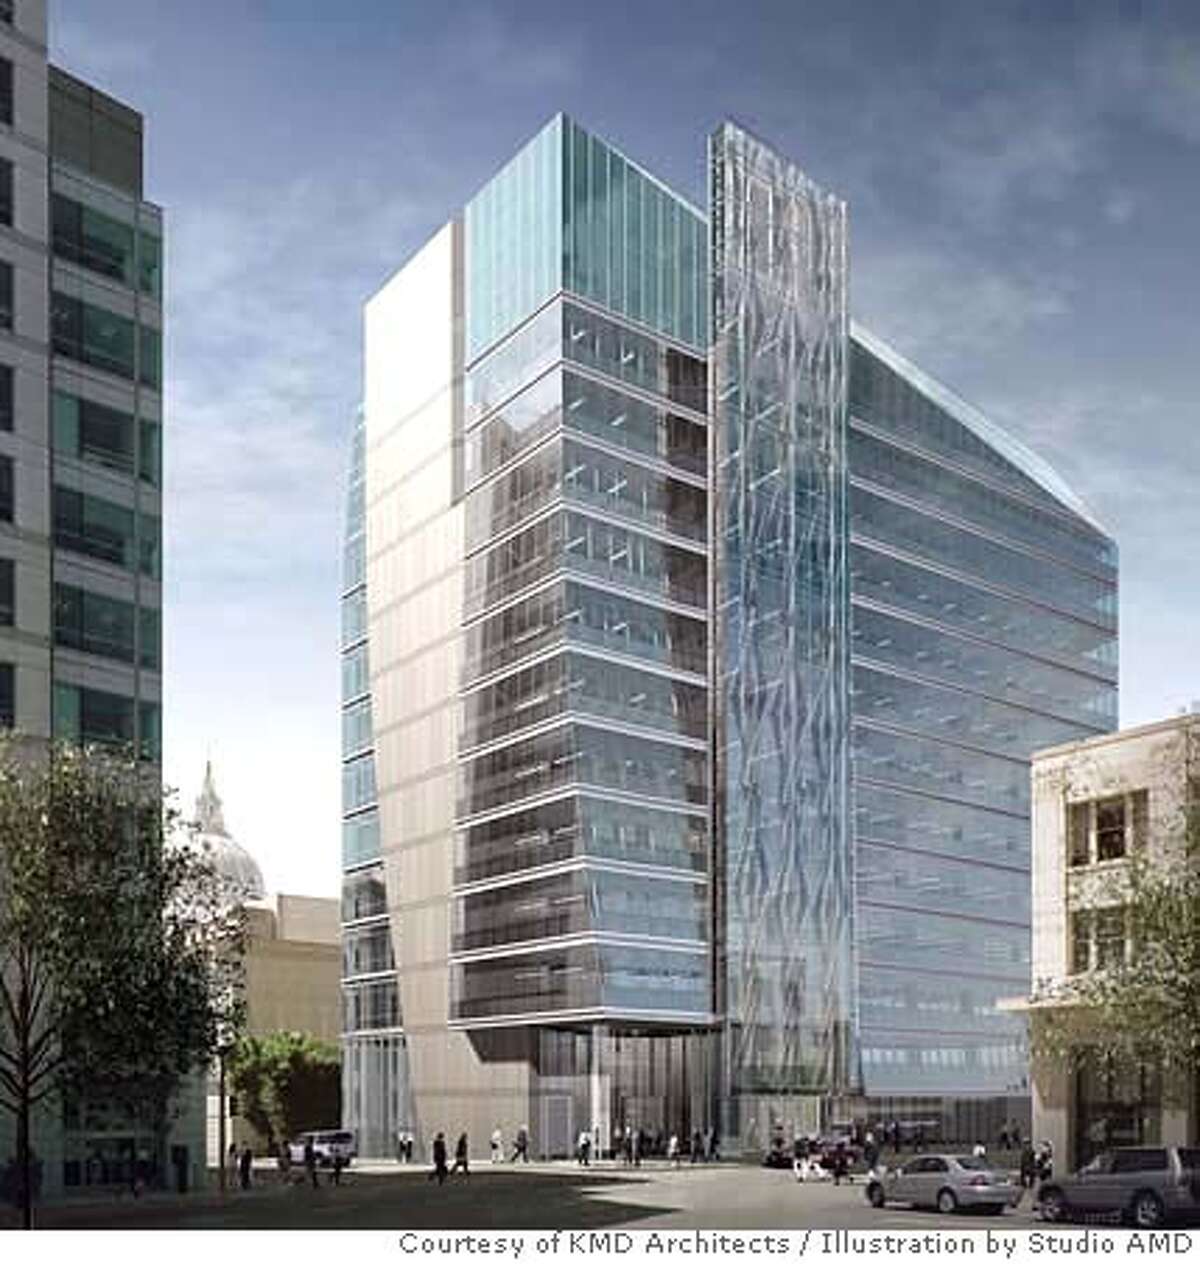 New SFPUC Administration Office Building at 525 Golden Gate Avenue viewed from the northeast corner at the Federal Building Plaza. Credit: Courtesy of KMD Architects, illustration by Studio AMD